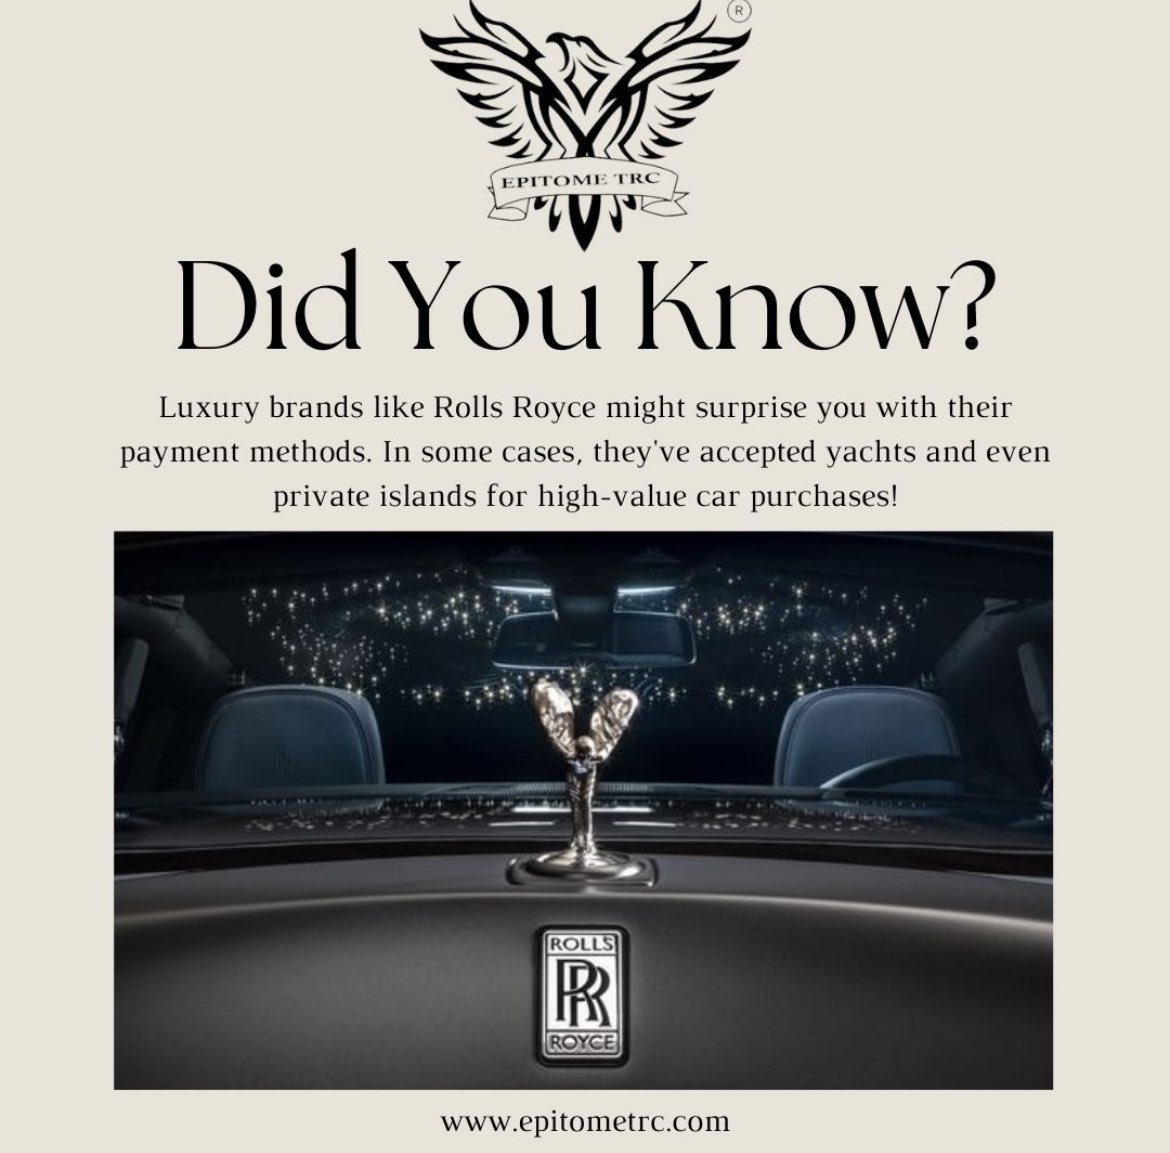 #didyouknow #fact #history #luxury #rollsroyce #payments #yachts #barter #private #islands #brands #epitometrc